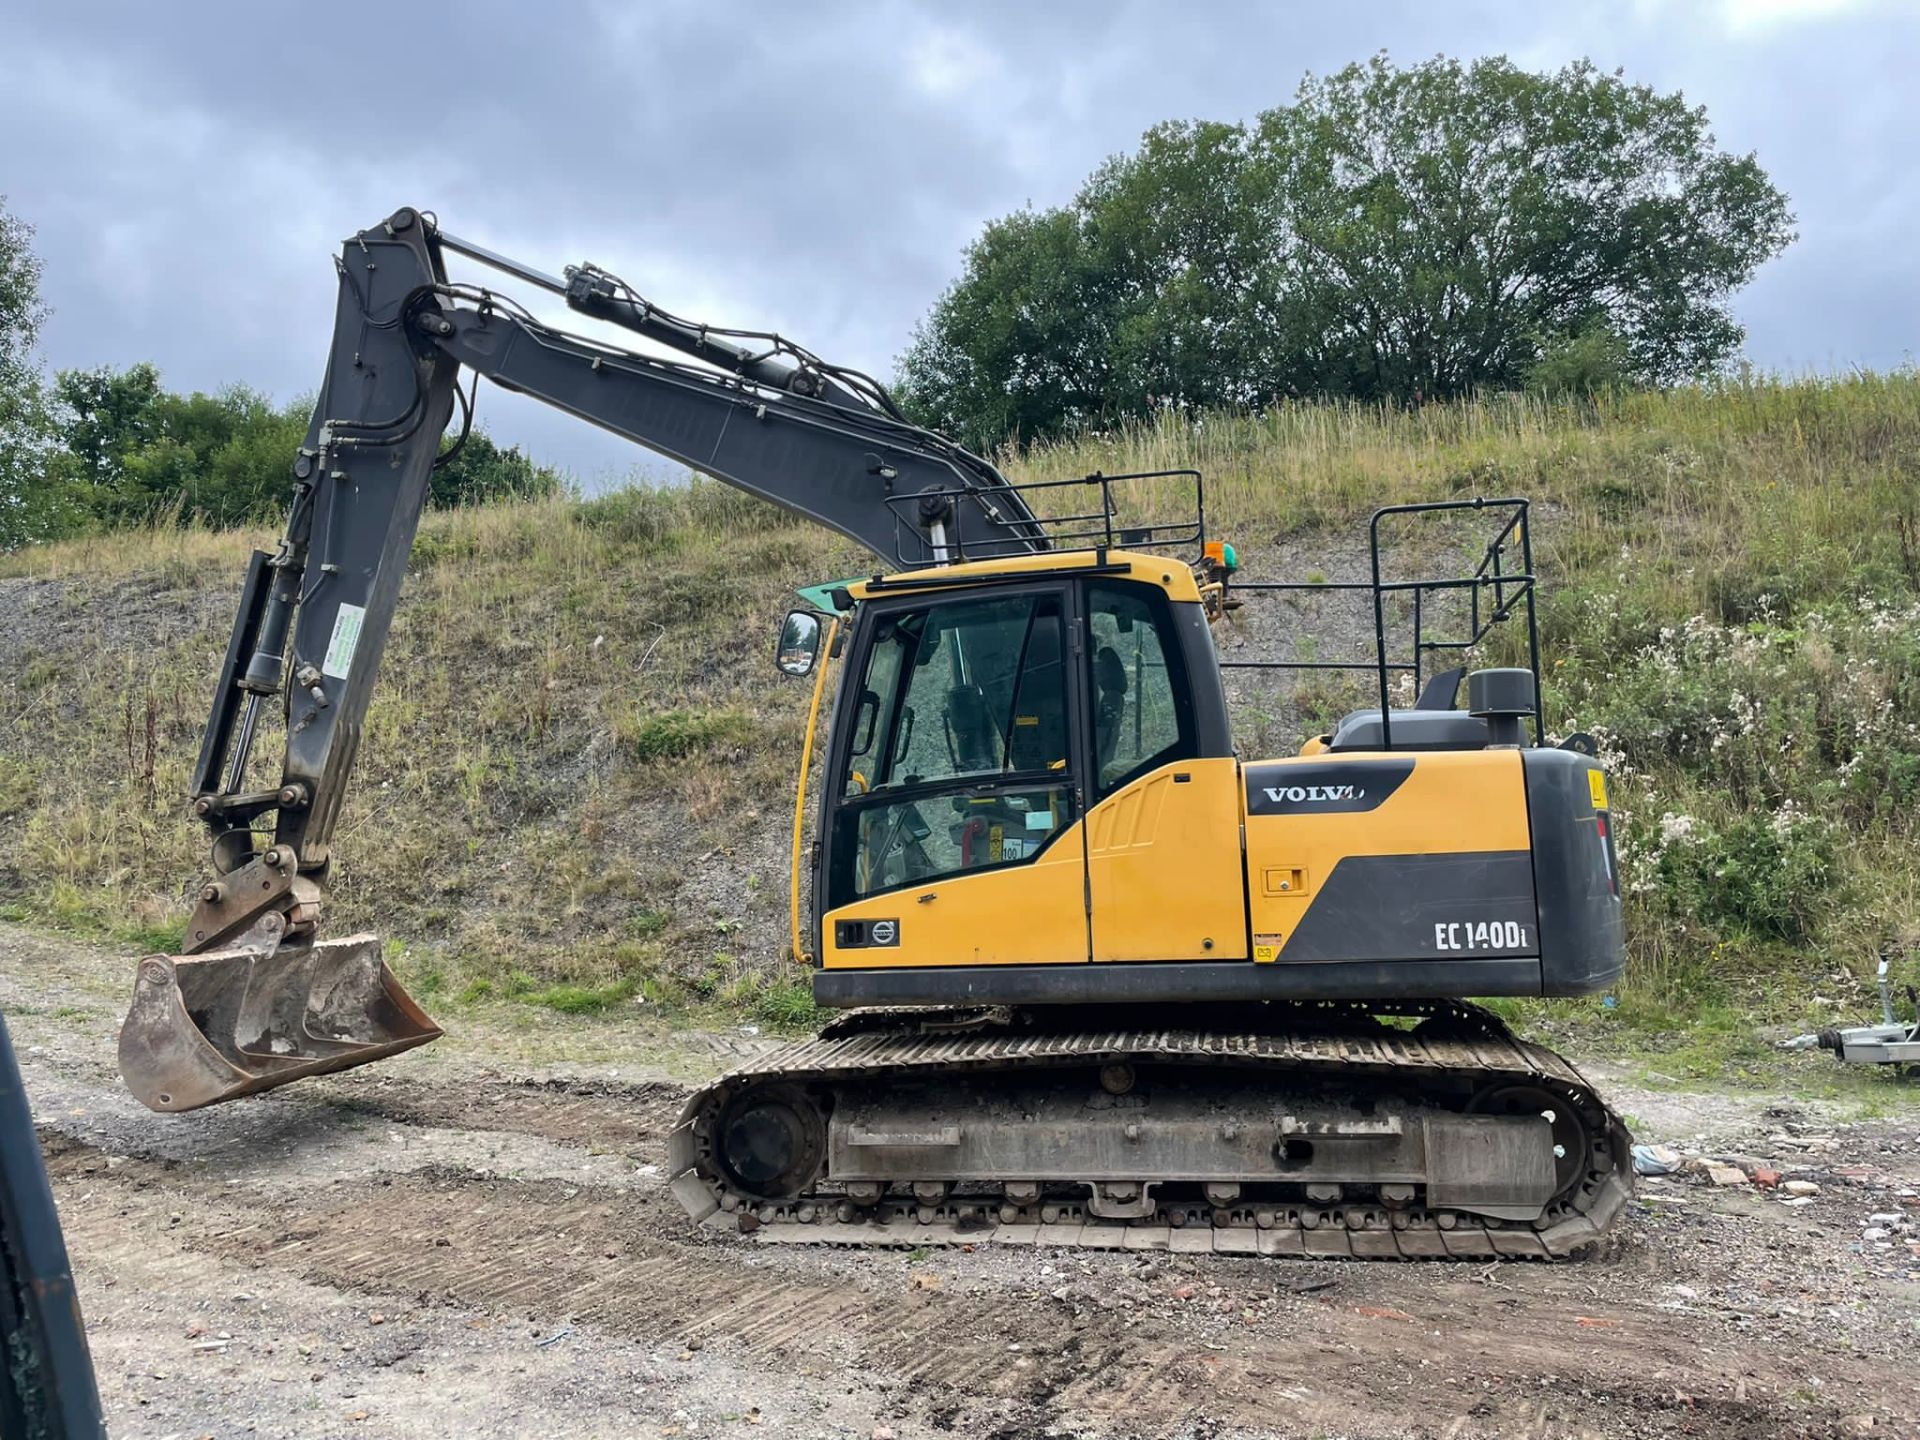 2014 VOLVO EC140DL 14 TON STEEL TRACKED EXCAVATOR, RUNS DRIVES AND DIGS, FULLY GLASS CAB *PLUS VAT* - Image 2 of 7